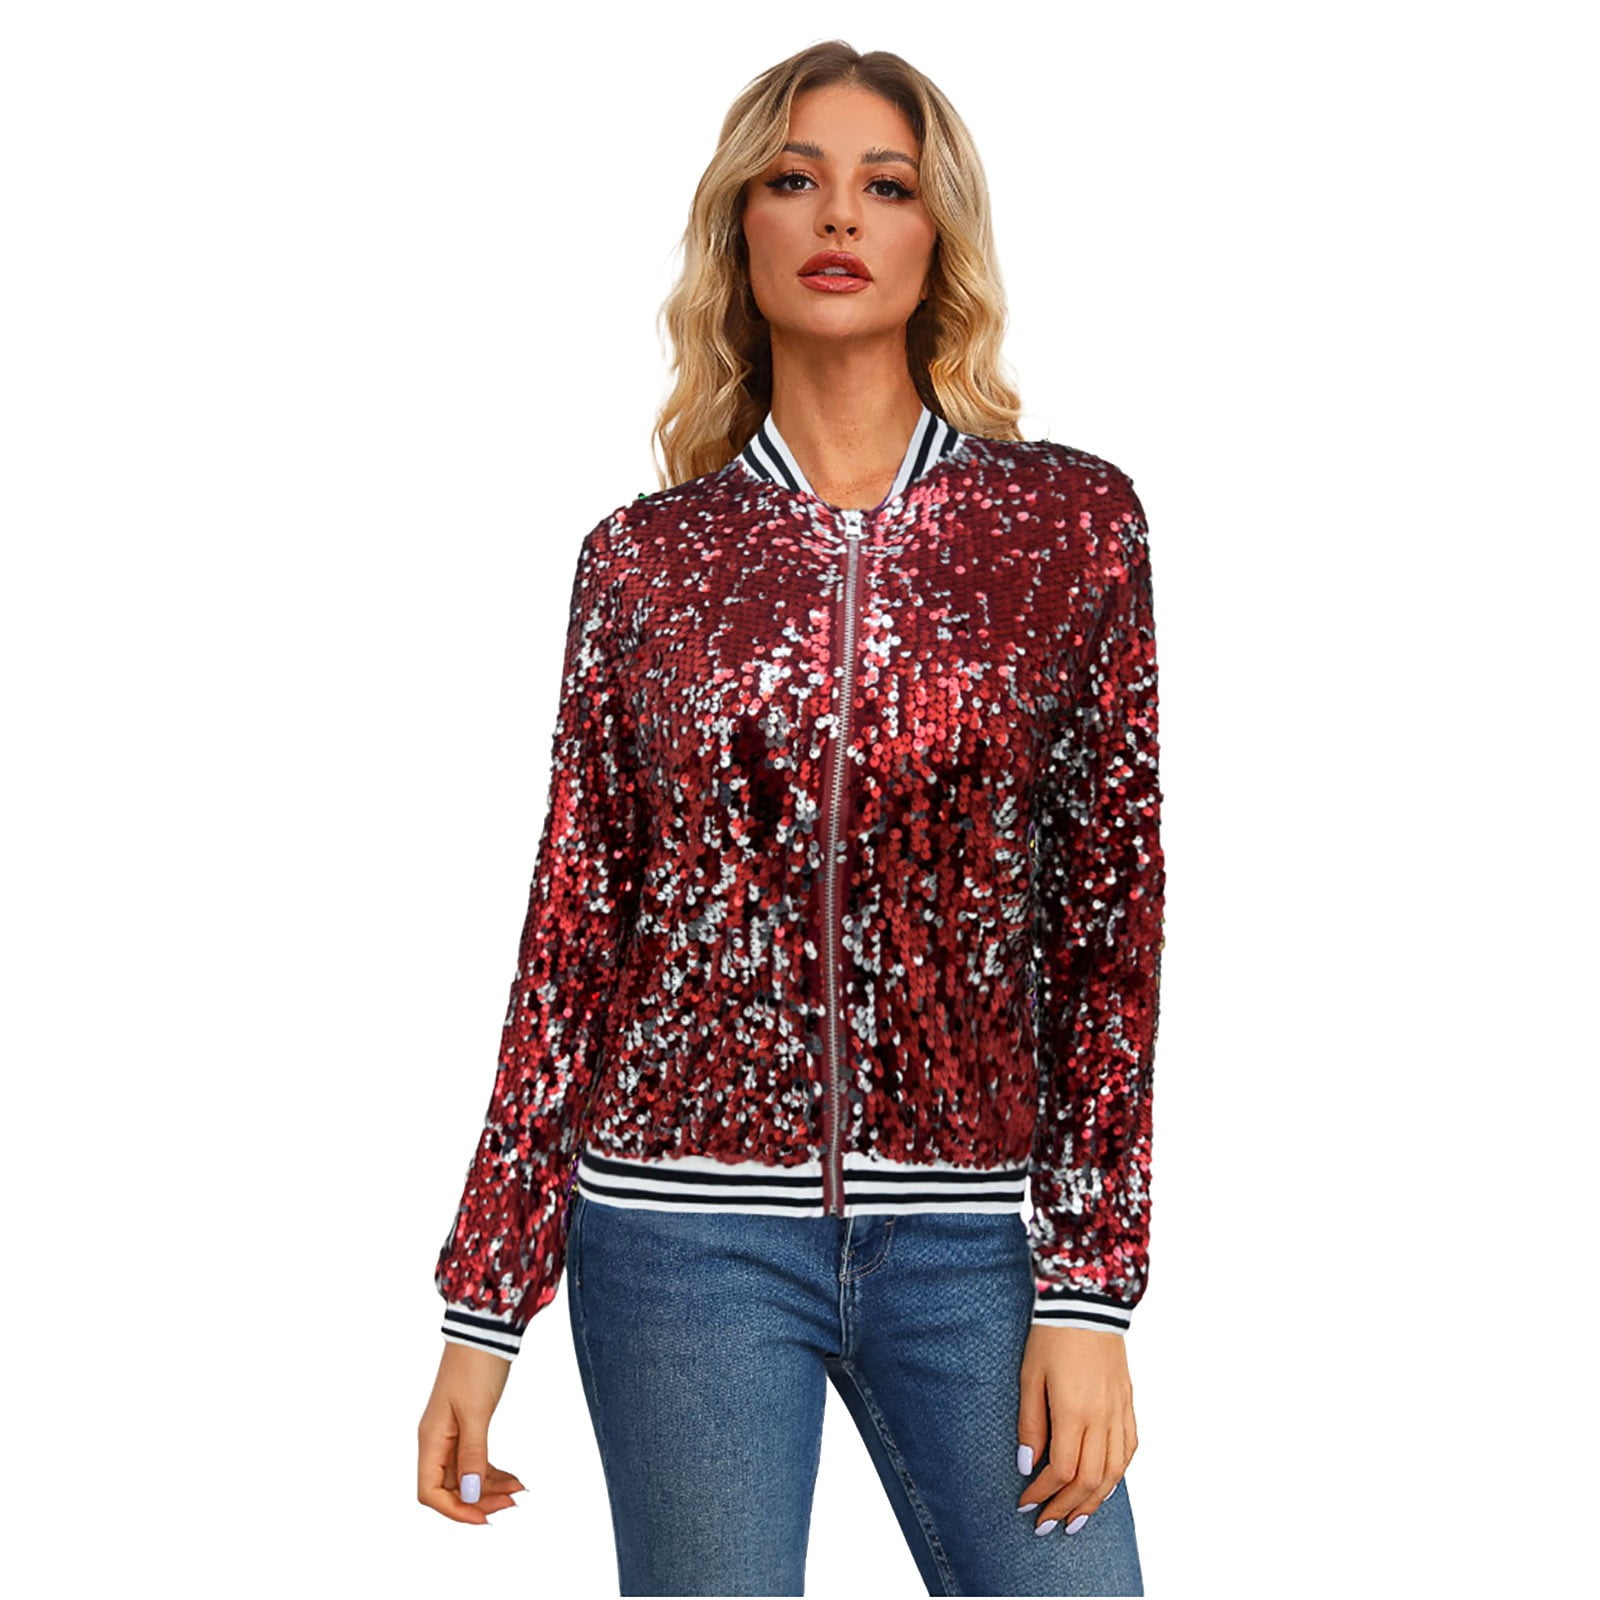 Baocc Jackets for Women Spring and Autumn Women's Long Sleeve Sequined ...